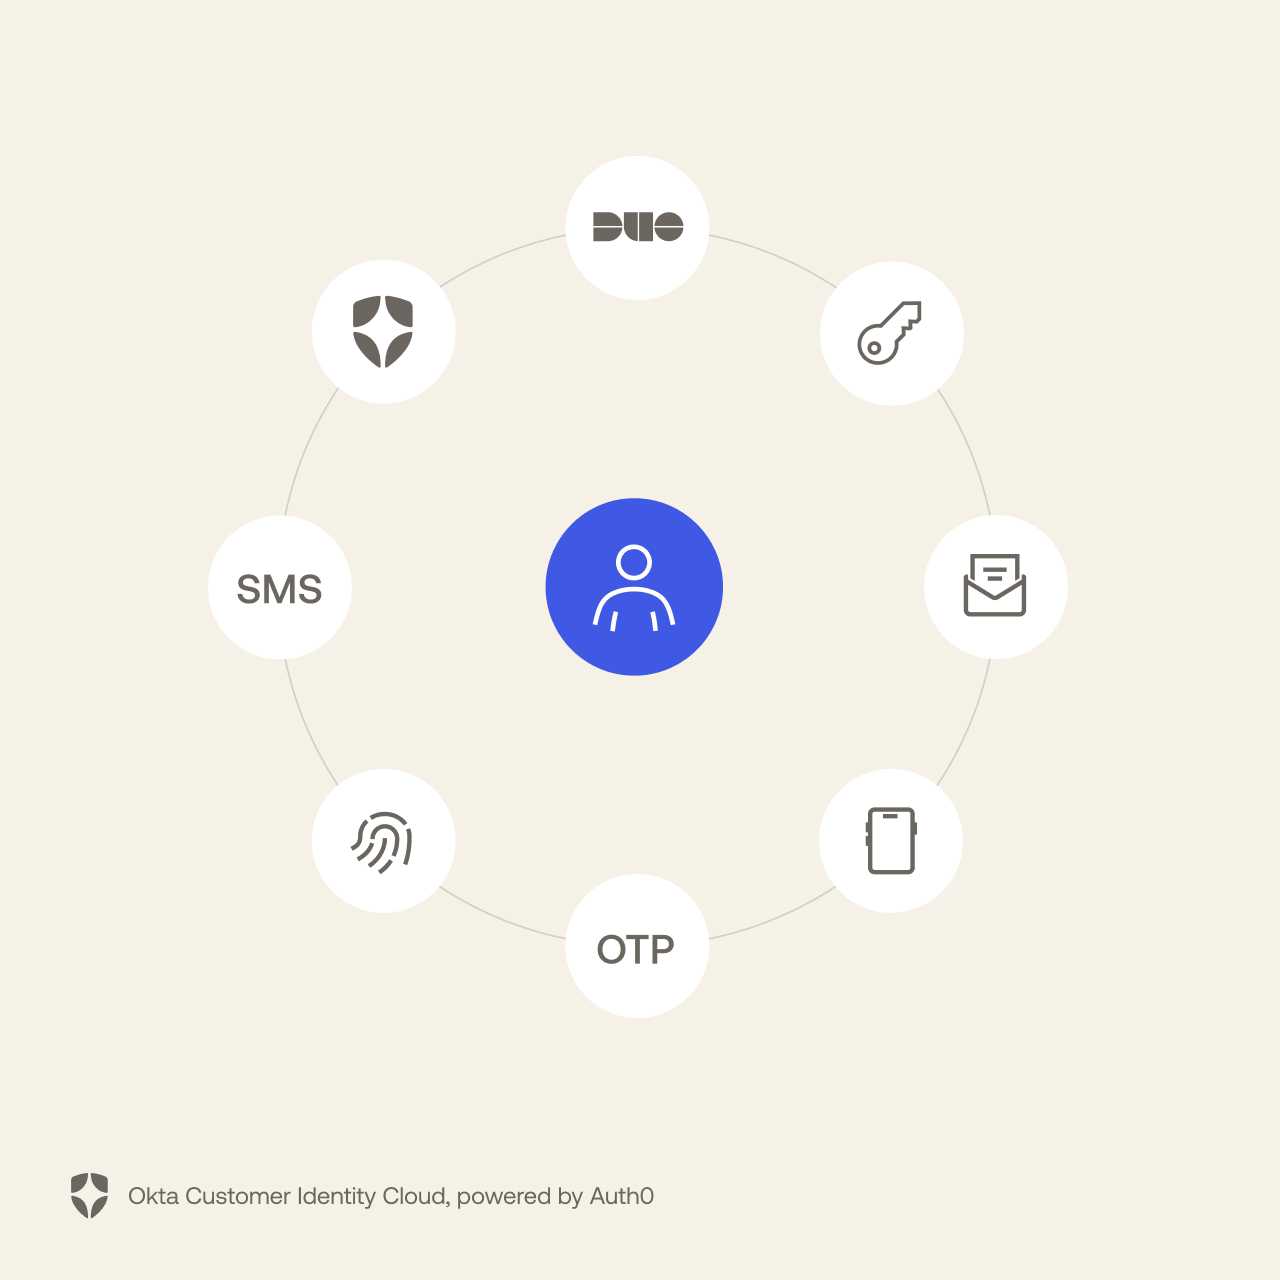 A graphic showing all the multifactor authentication options in a circle surrounding an icon of a person